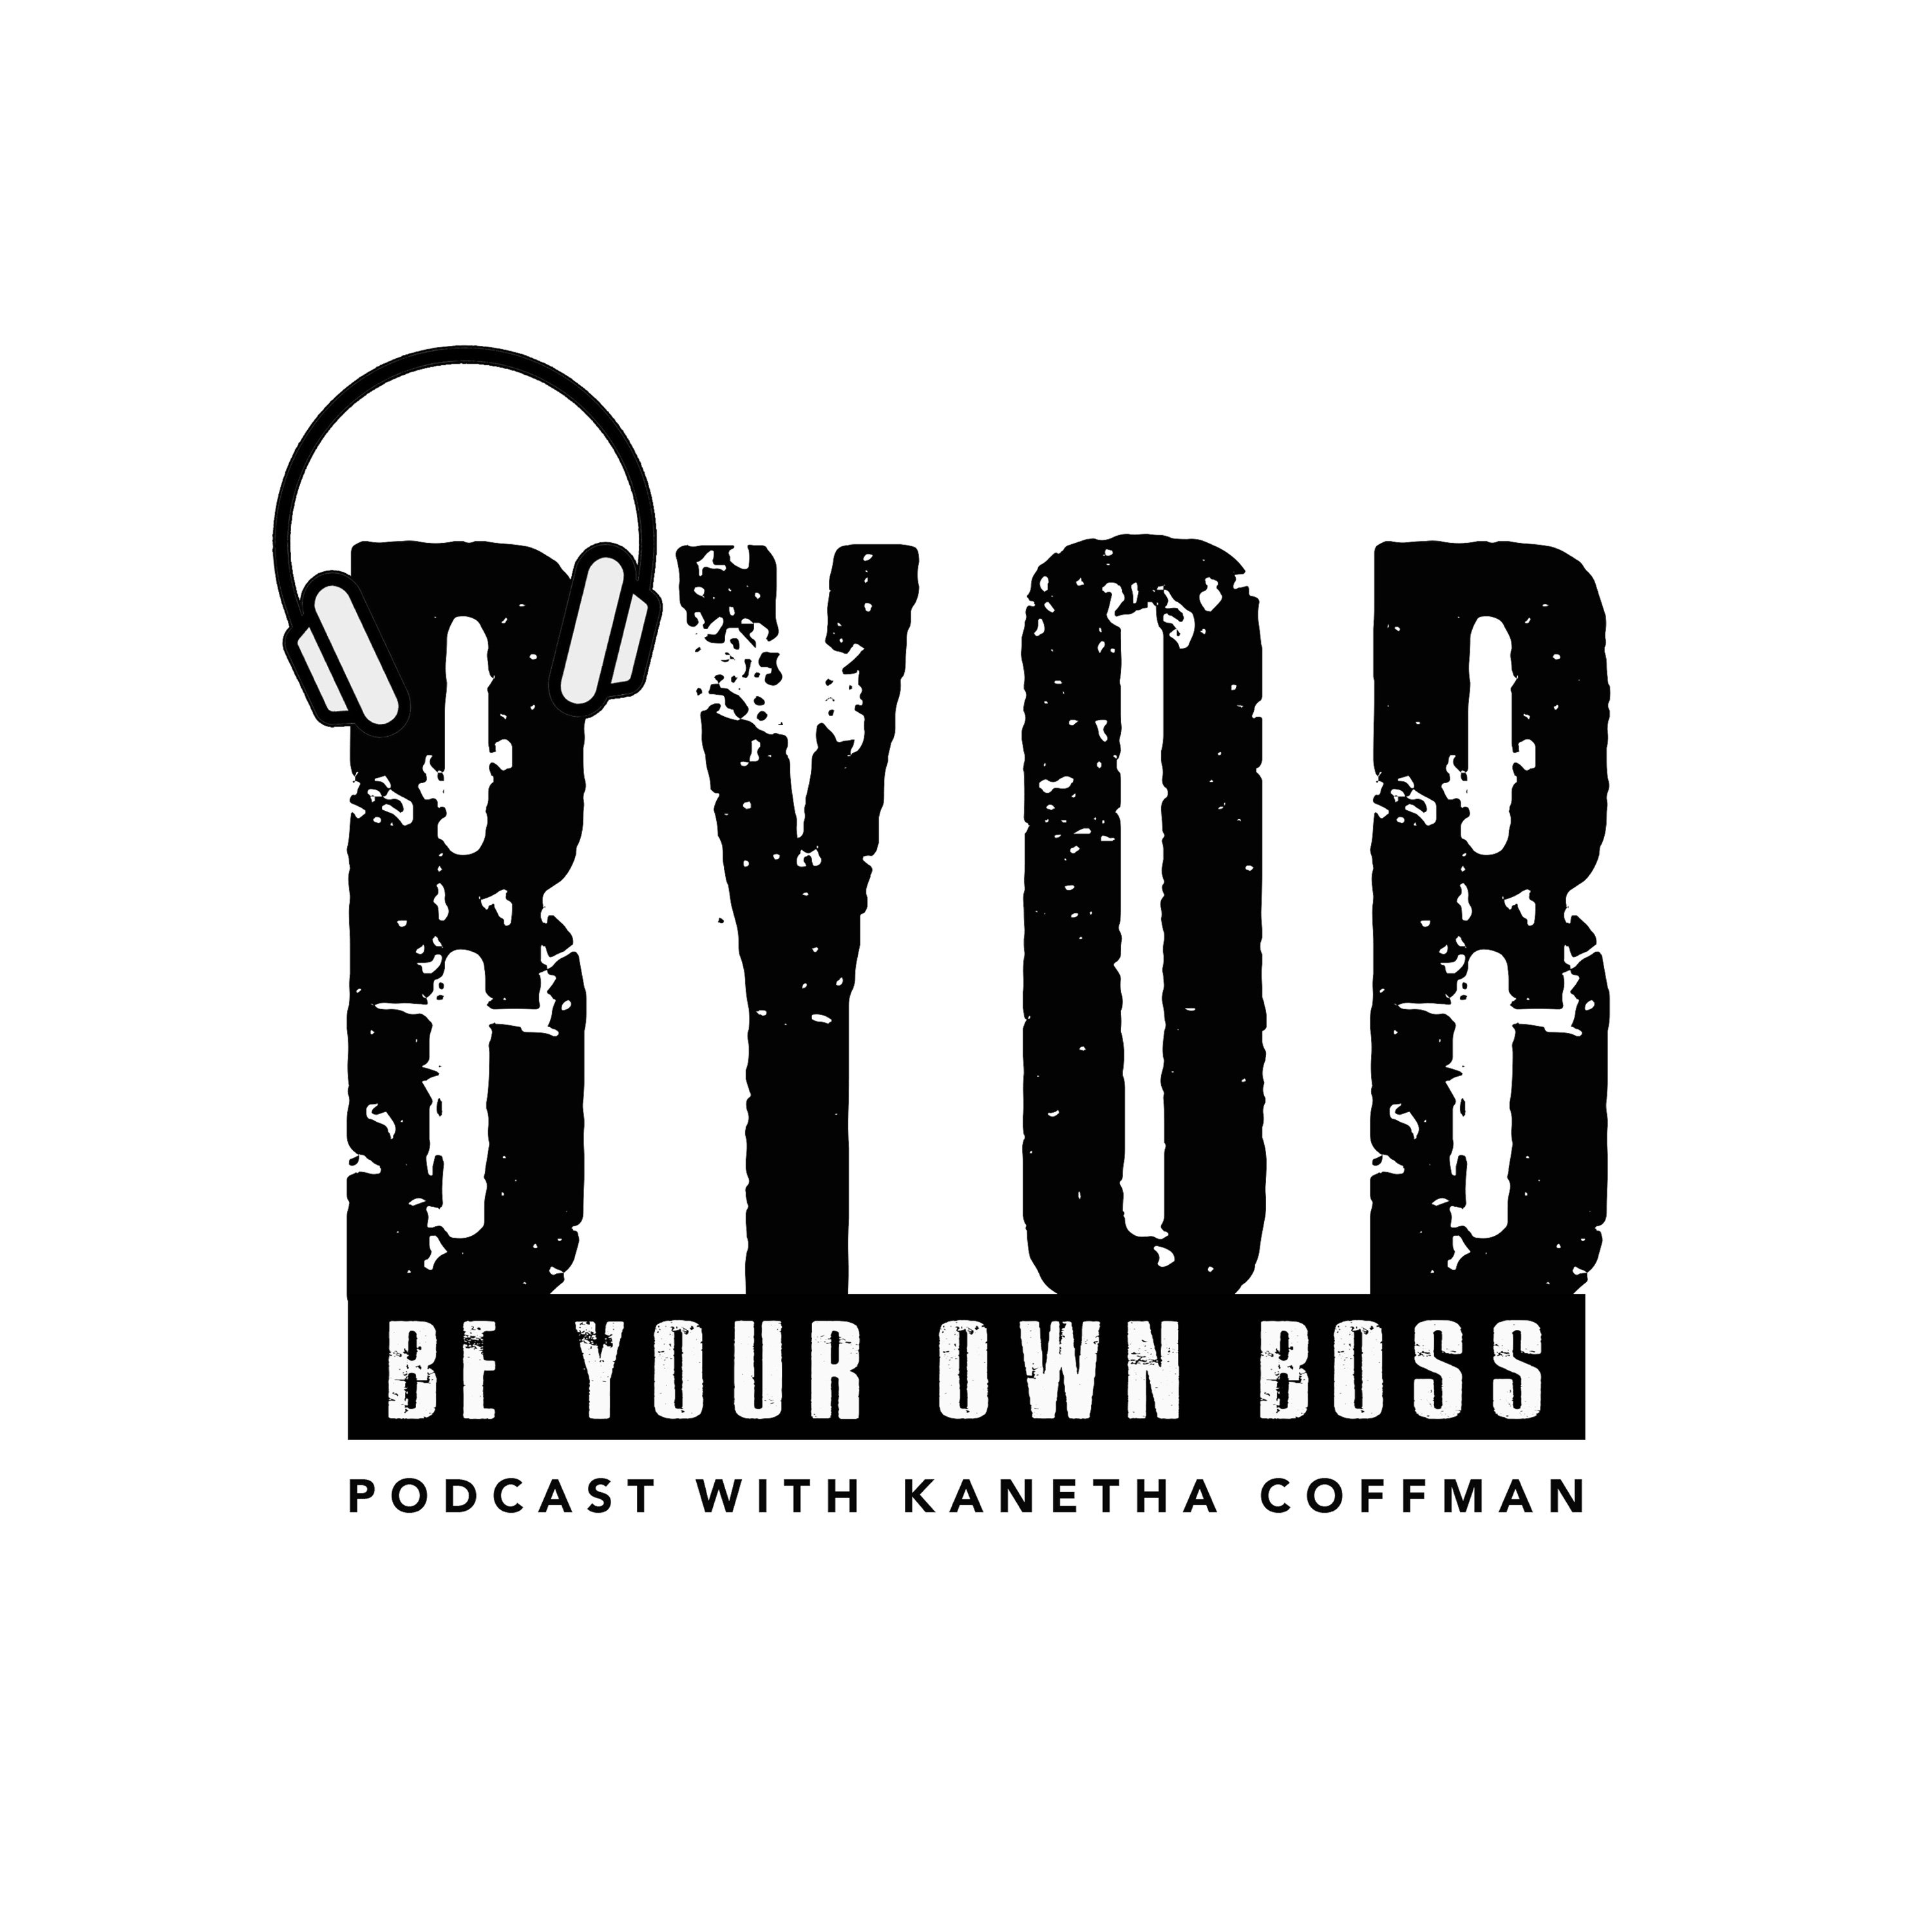 Be Your Own Boss Podcast